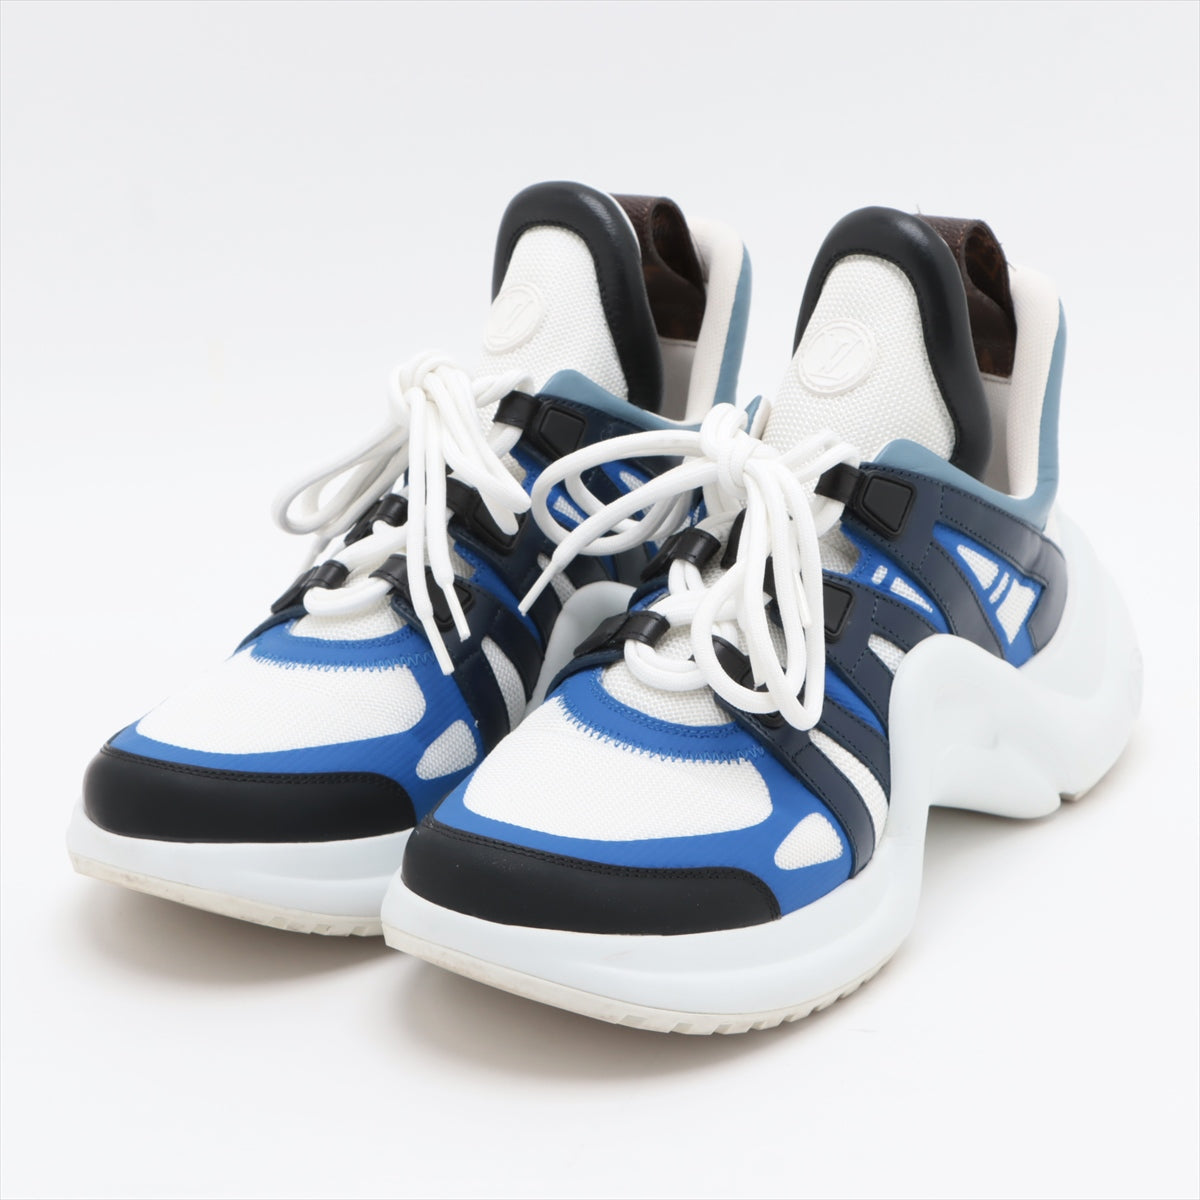 Louis Vuitton LV ARC LIGHT LINE 19-year Mesh x leather Sneakers 41 Unisex White GO0139 Monogram There is a bag